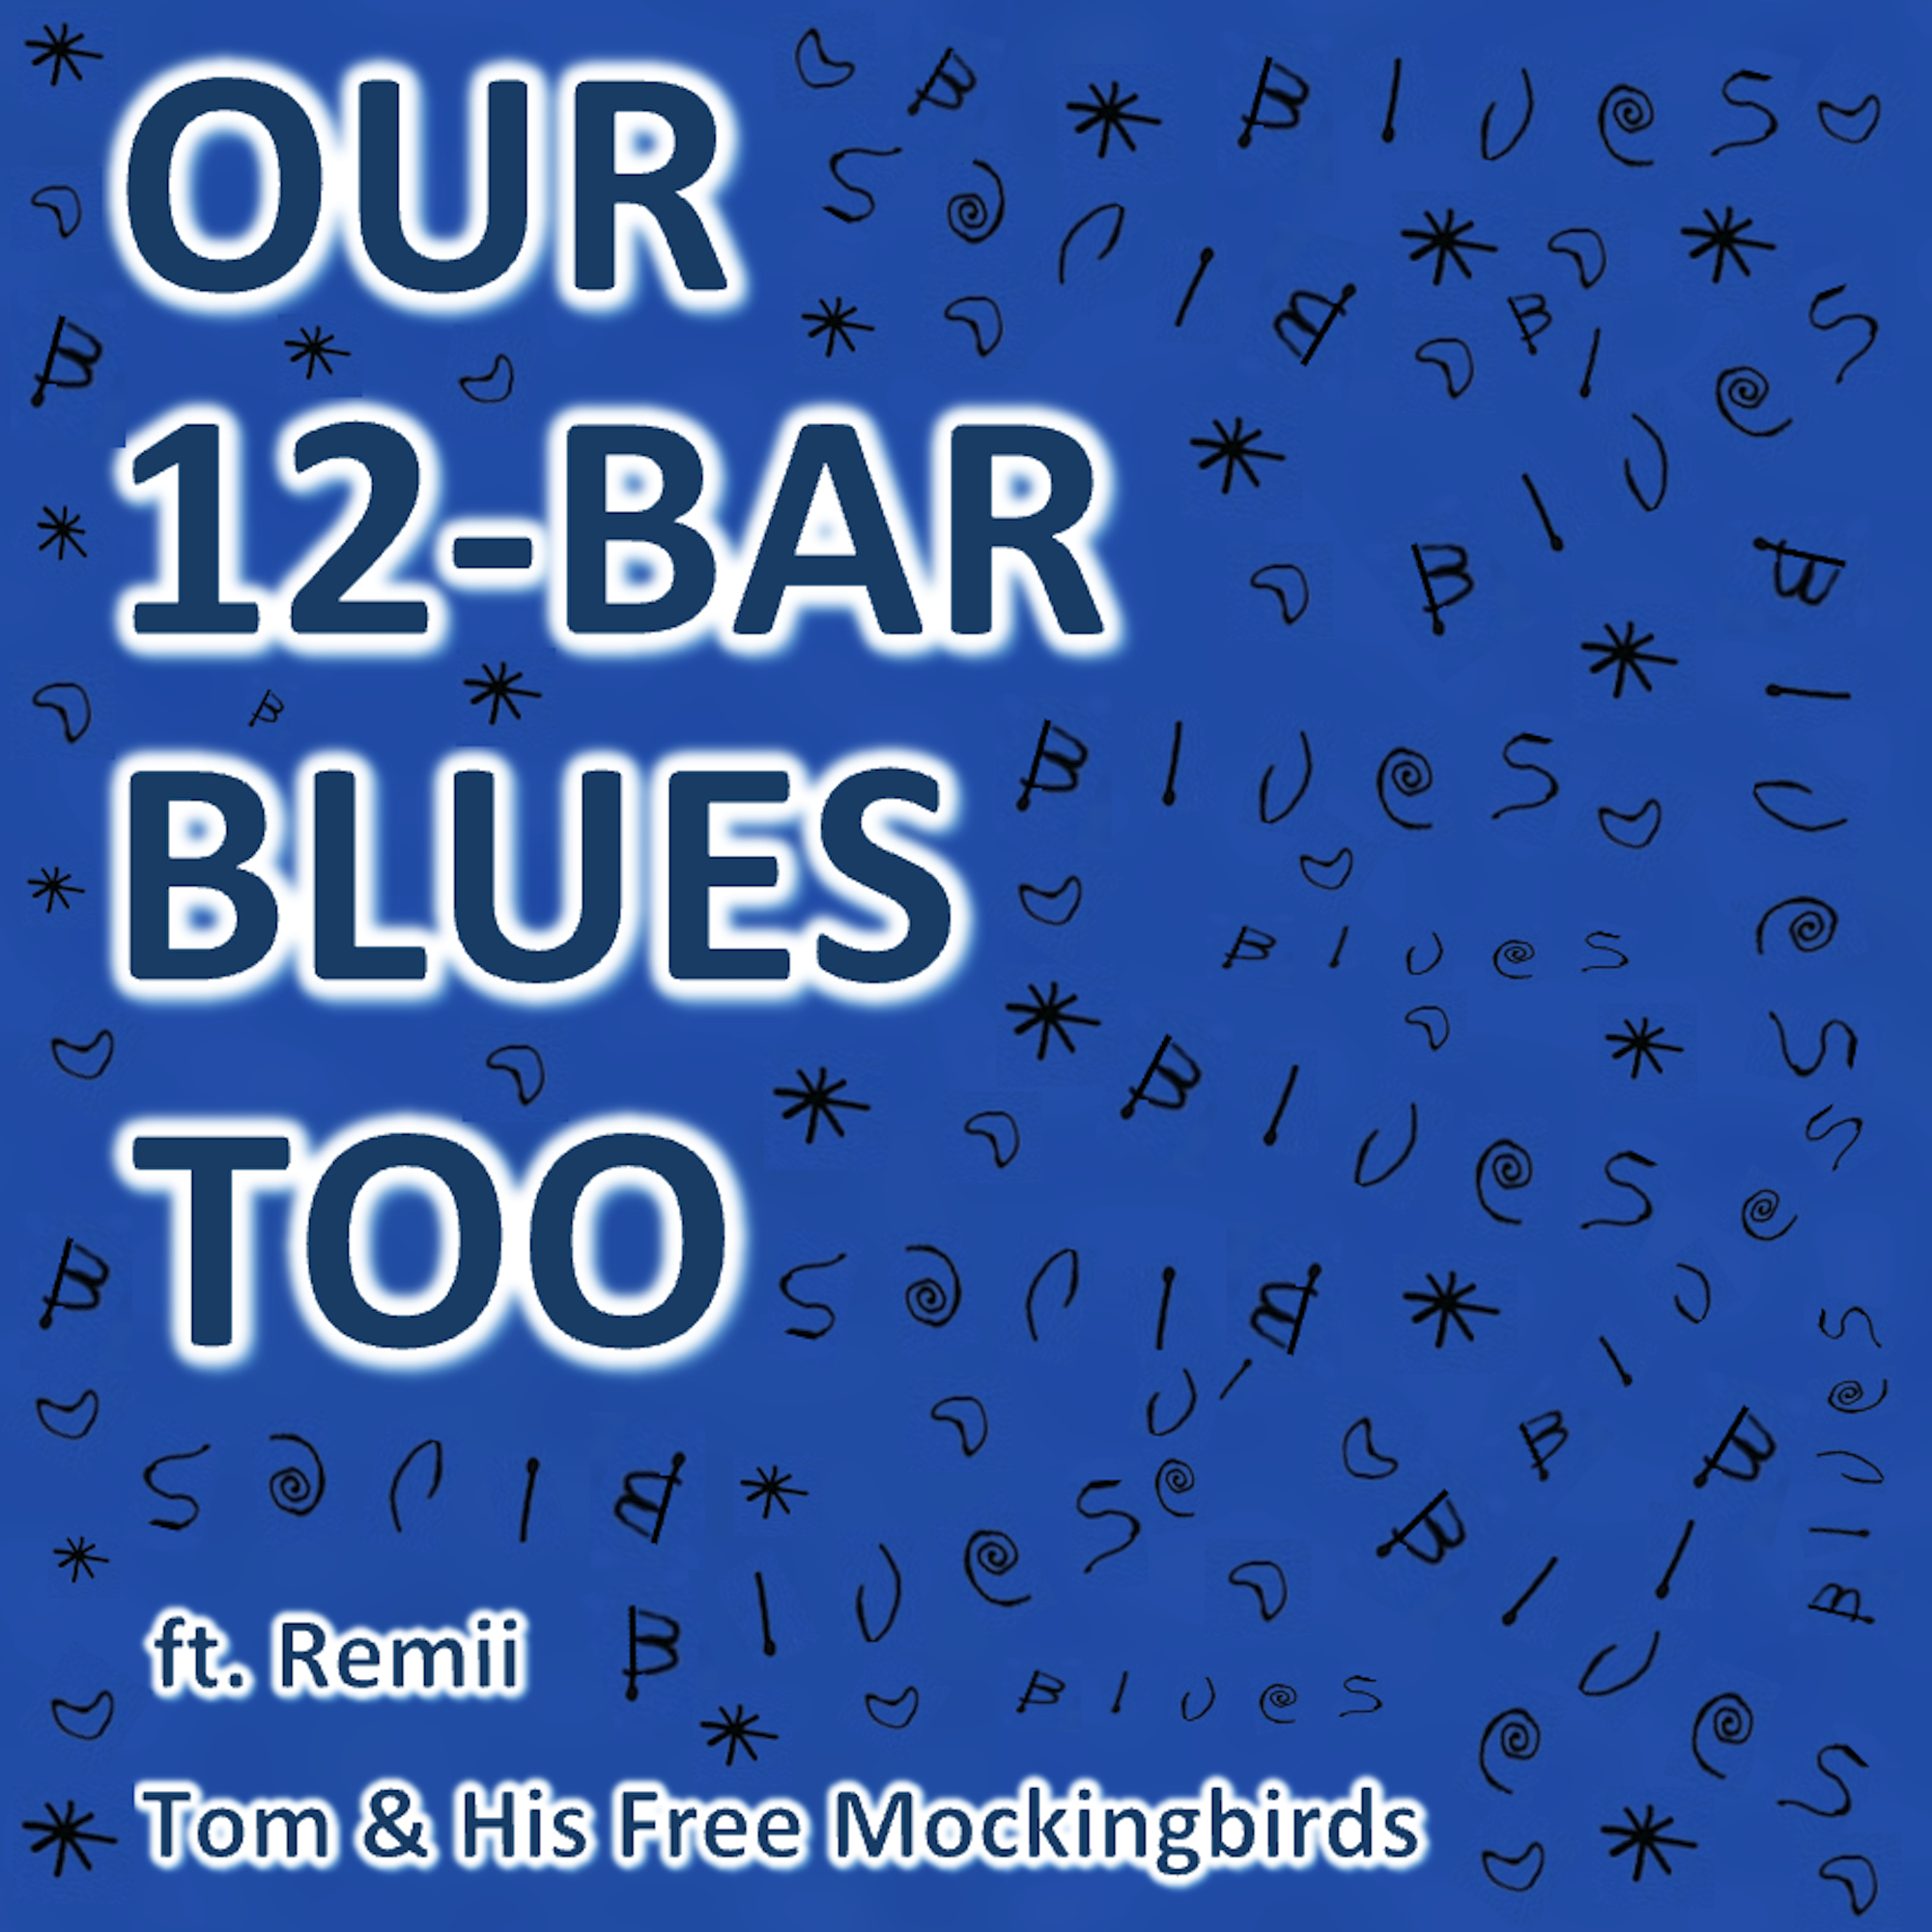 Unveiling the Essence of Tom & His Free Mockingbirds: ‘Our 12-Bar Blues Too’ Echoes Through the Blues Powerplay on the playlist